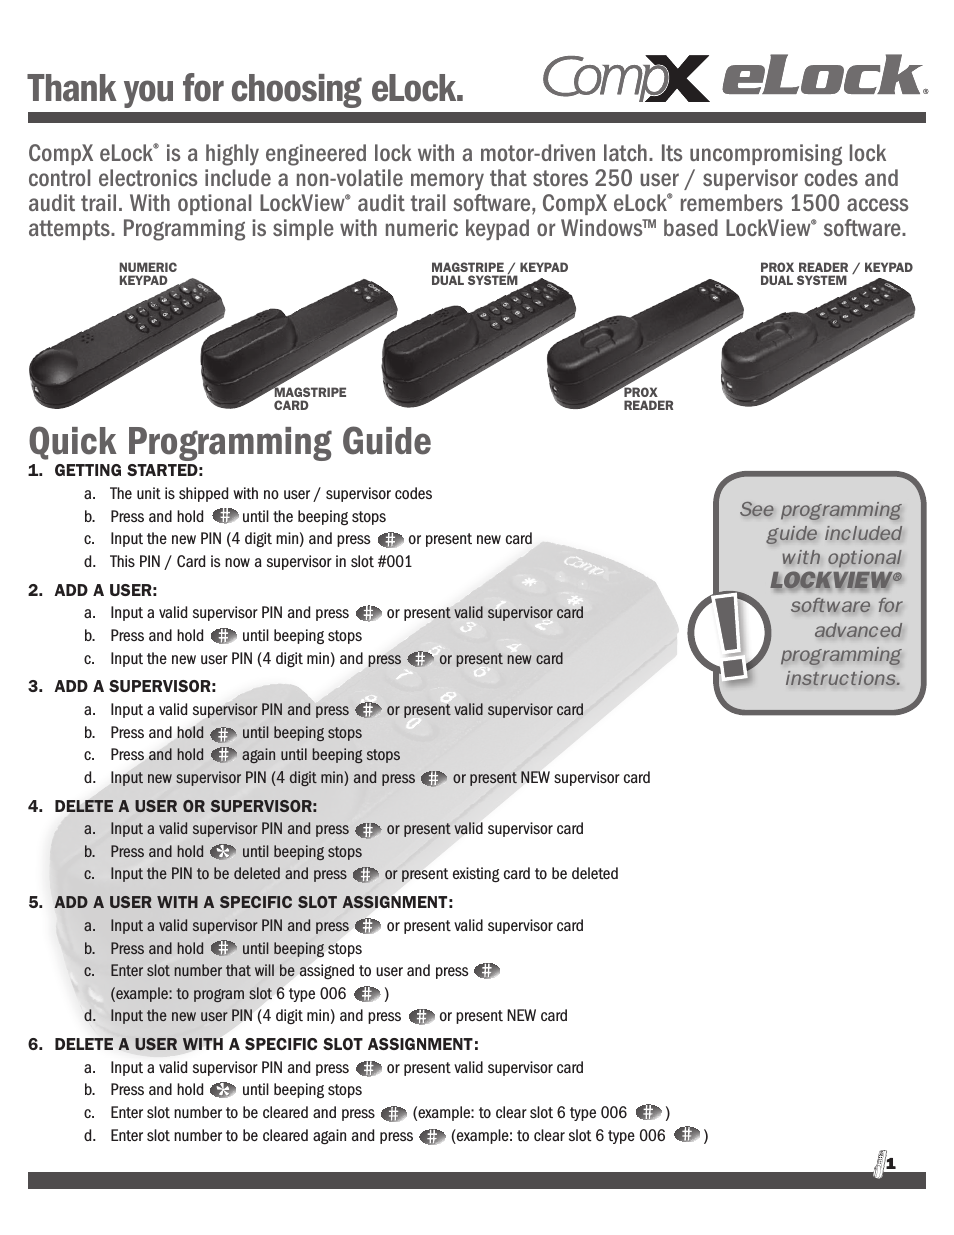 Prox Reader / Keypad Dual System Quick Programming Guide